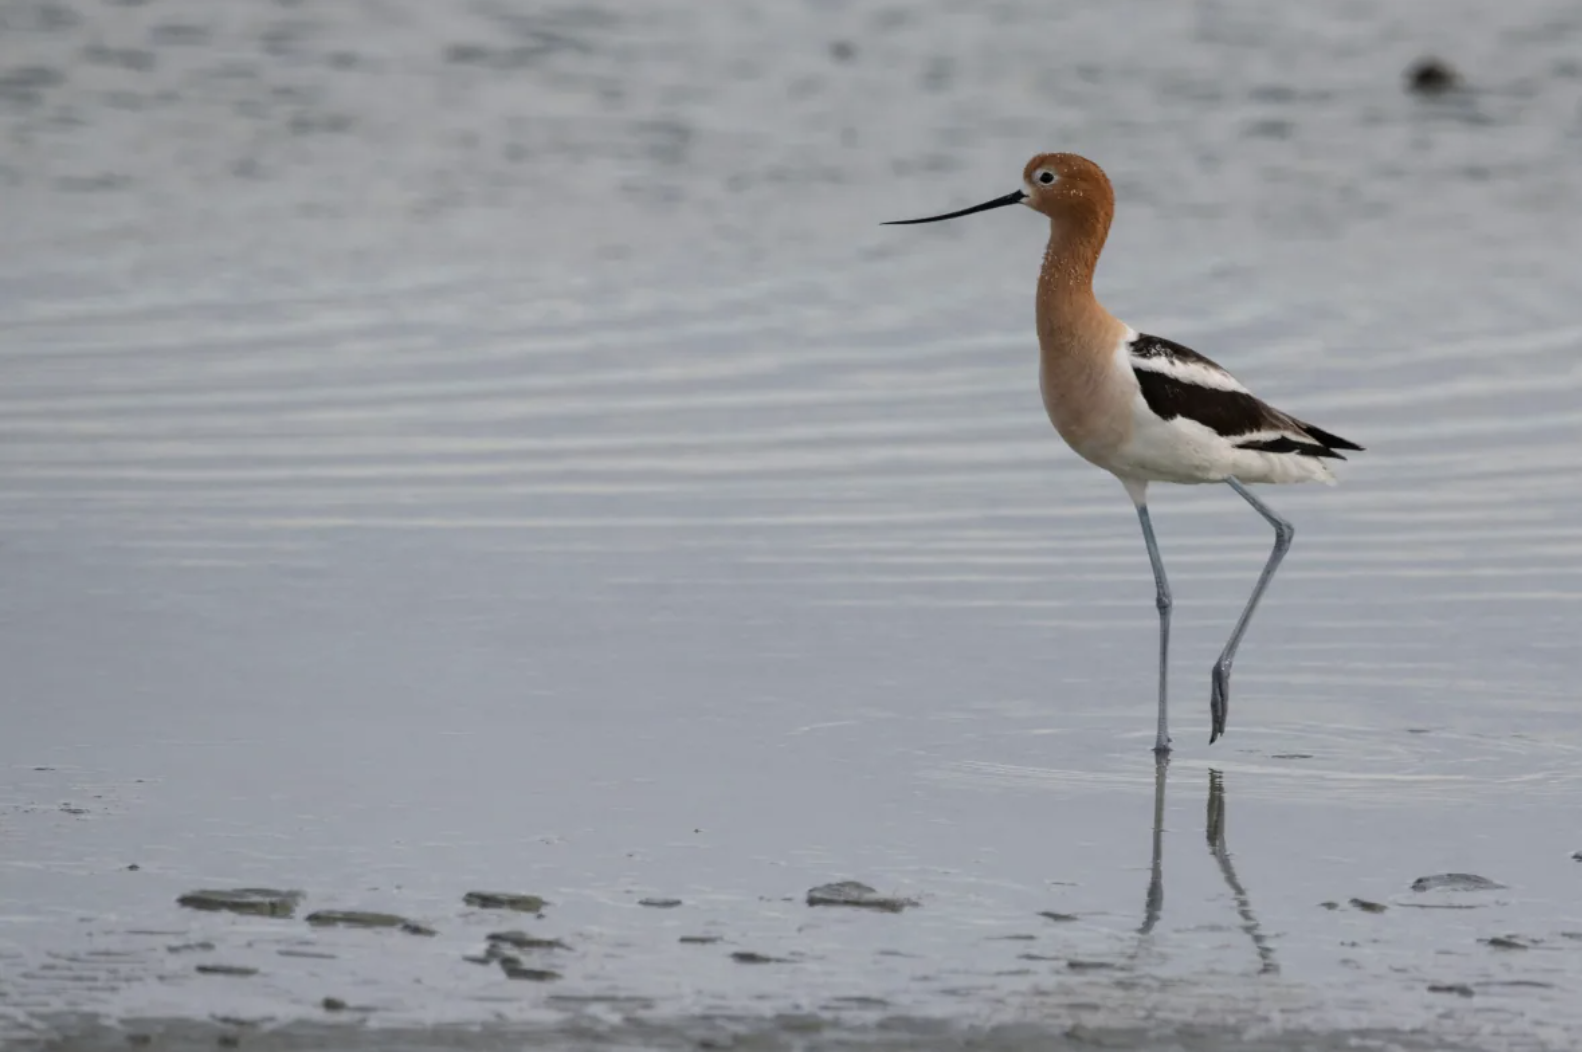 (Jason Bantle/Nature Conservancy of Canada) An American Avocet at the Nature Conservancy of Canada’s Mackie Ranch conservation project. The property is located along the eastern shoreline of Chaplin Lake, between Moose Jaw and Swift Current. (Jason Bantle/Nature Conservancy of Canada)